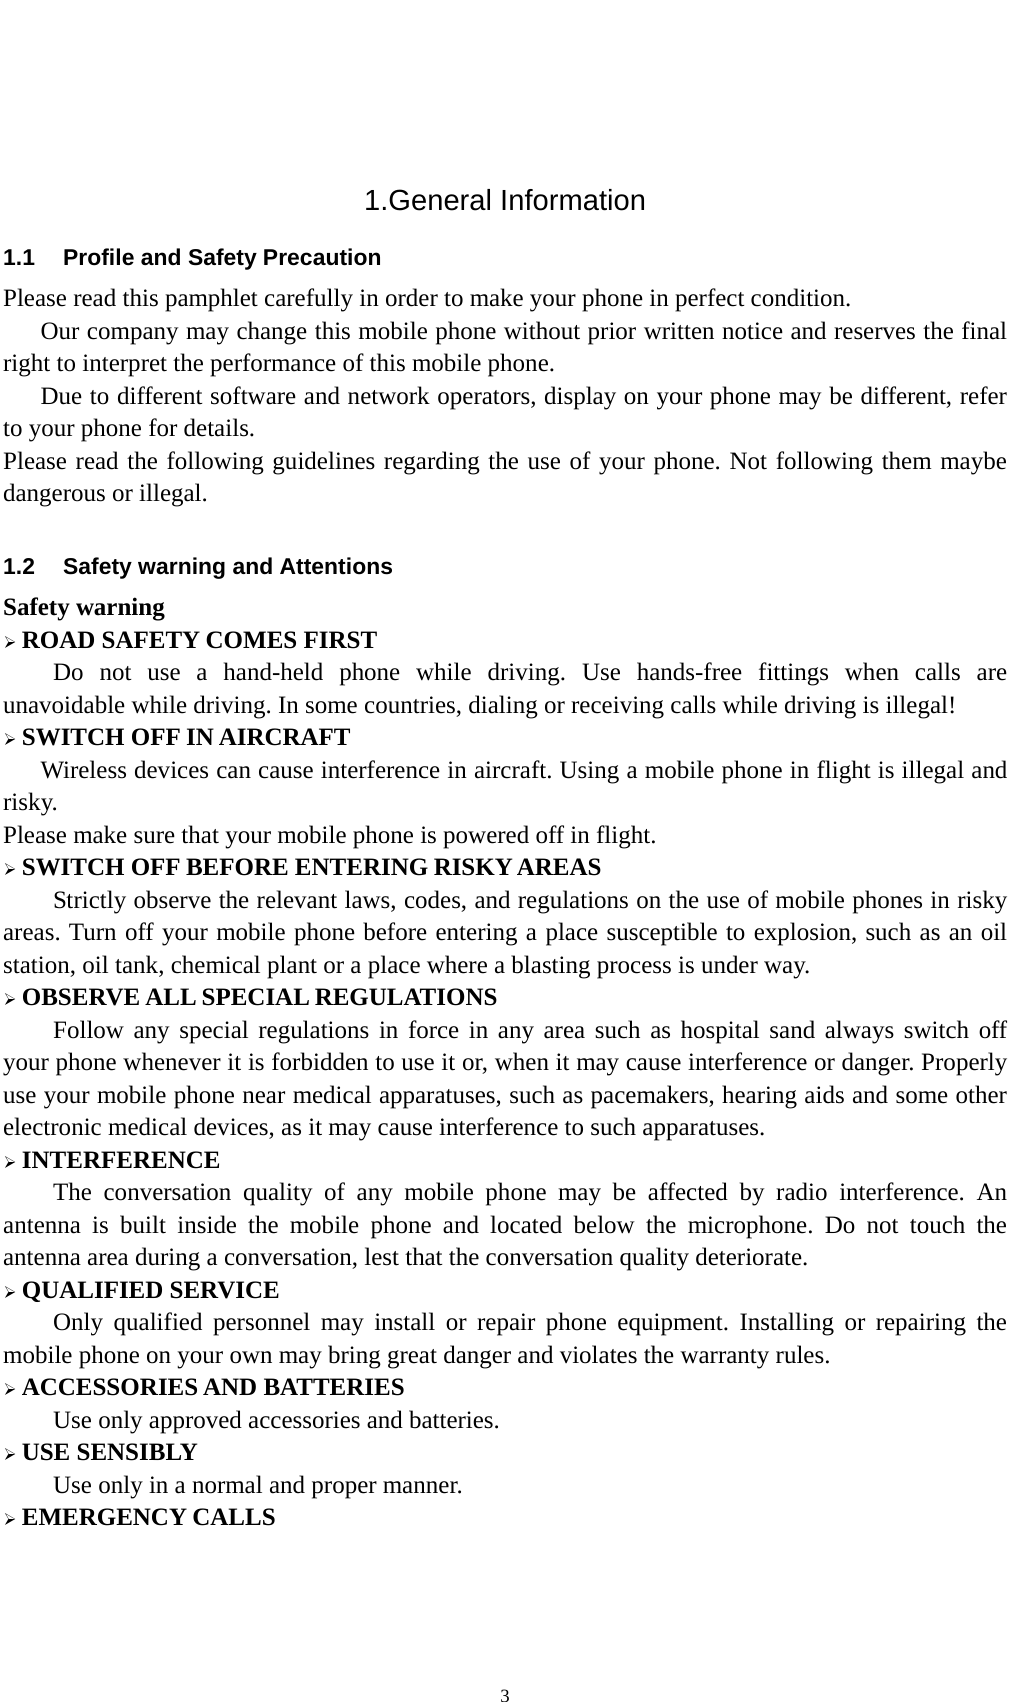    3 1.General Information 1.1  Profile and Safety Precaution Please read this pamphlet carefully in order to make your phone in perfect condition.       Our company may change this mobile phone without prior written notice and reserves the final right to interpret the performance of this mobile phone.       Due to different software and network operators, display on your phone may be different, refer to your phone for details. Please read the following guidelines regarding the use of your phone. Not following them maybe dangerous or illegal.  1.2  Safety warning and Attentions Safety warning  ROAD SAFETY COMES FIRST Do not use a hand-held phone while driving. Use hands-free fittings when calls are unavoidable while driving. In some countries, dialing or receiving calls while driving is illegal!  SWITCH OFF IN AIRCRAFT Wireless devices can cause interference in aircraft. Using a mobile phone in flight is illegal and risky.   Please make sure that your mobile phone is powered off in flight.  SWITCH OFF BEFORE ENTERING RISKY AREAS Strictly observe the relevant laws, codes, and regulations on the use of mobile phones in risky areas. Turn off your mobile phone before entering a place susceptible to explosion, such as an oil station, oil tank, chemical plant or a place where a blasting process is under way.  OBSERVE ALL SPECIAL REGULATIONS Follow any special regulations in force in any area such as hospital sand always switch off your phone whenever it is forbidden to use it or, when it may cause interference or danger. Properly use your mobile phone near medical apparatuses, such as pacemakers, hearing aids and some other electronic medical devices, as it may cause interference to such apparatuses.  INTERFERENCE The conversation quality of any mobile phone may be affected by radio interference. An antenna is built inside the mobile phone and located below the microphone. Do not touch the antenna area during a conversation, lest that the conversation quality deteriorate.  QUALIFIED SERVICE Only qualified personnel may install or repair phone equipment. Installing or repairing the mobile phone on your own may bring great danger and violates the warranty rules.  ACCESSORIES AND BATTERIES Use only approved accessories and batteries.  USE SENSIBLY Use only in a normal and proper manner.  EMERGENCY CALLS 